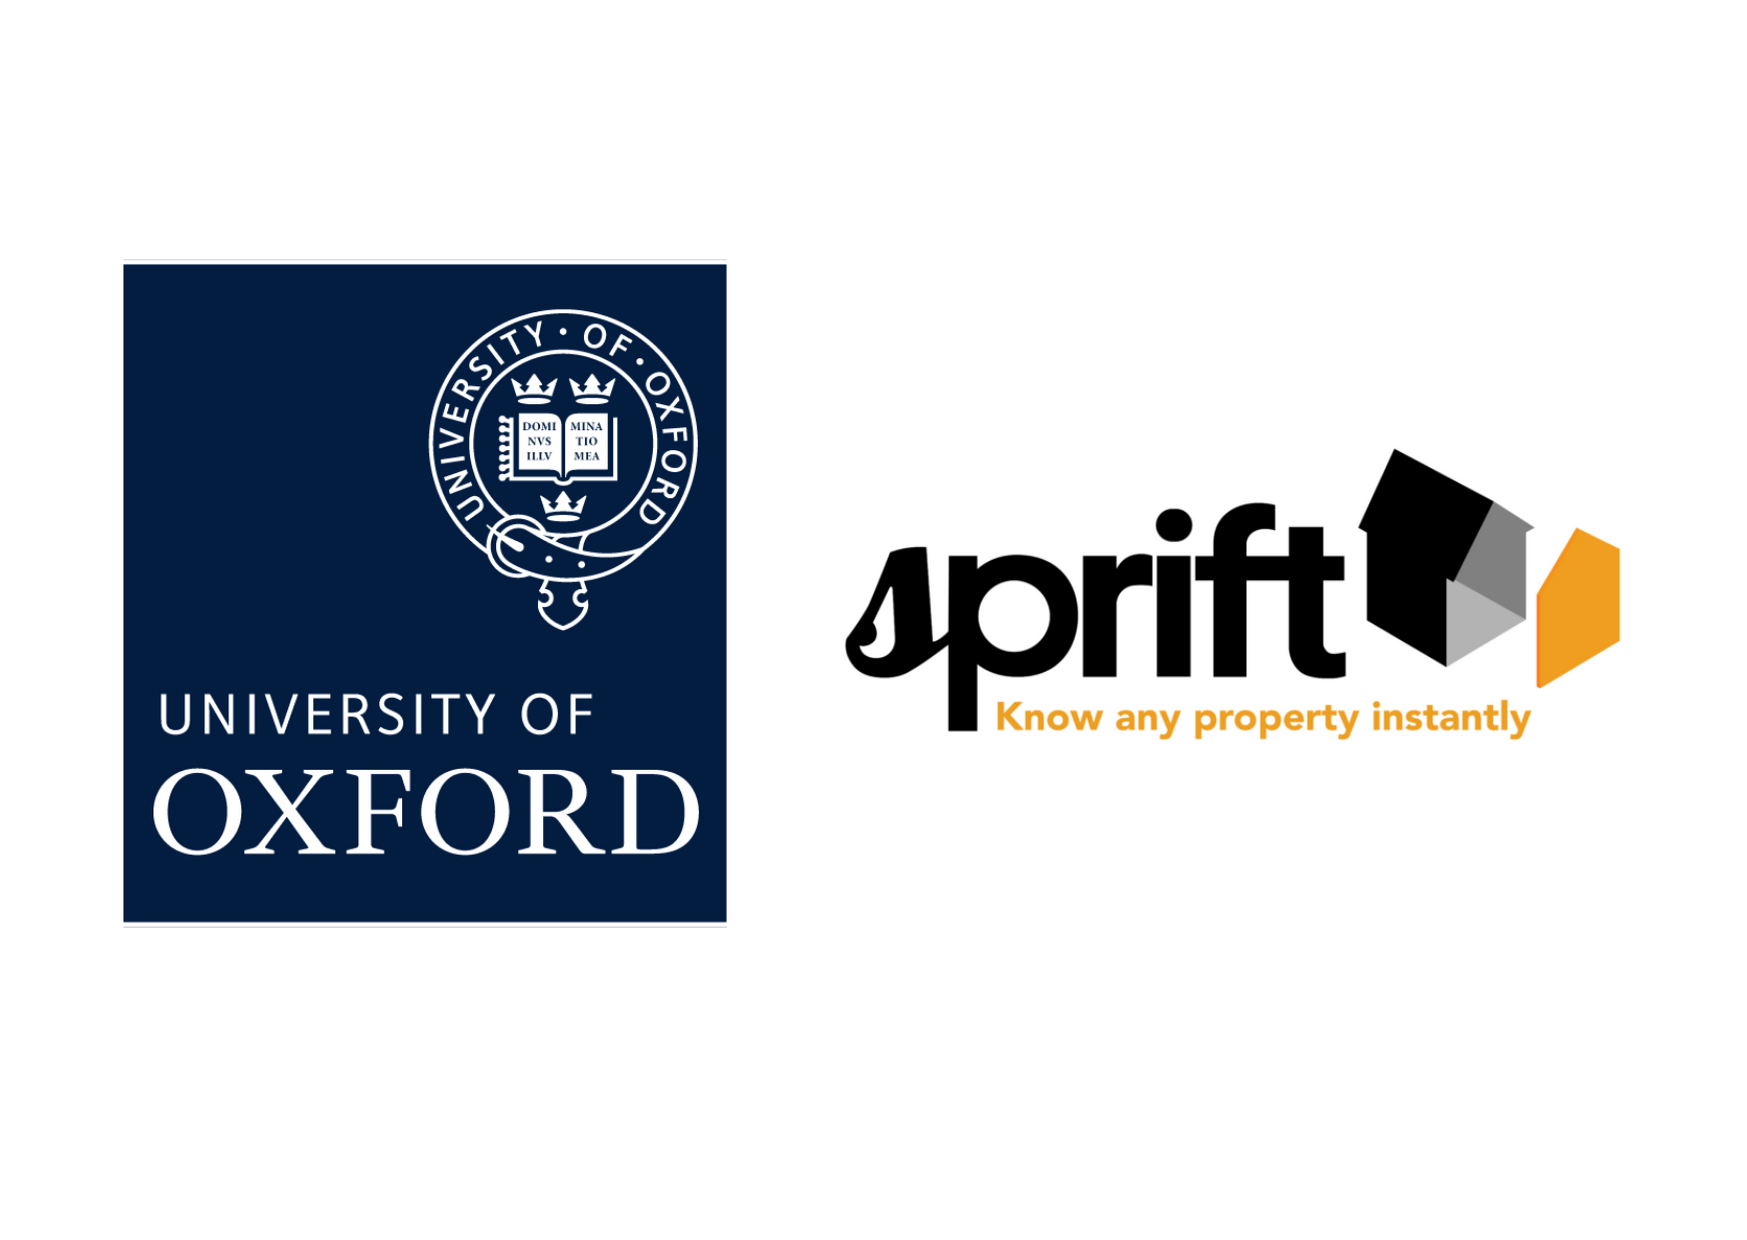 Featured in the Oxford University PropTech Report